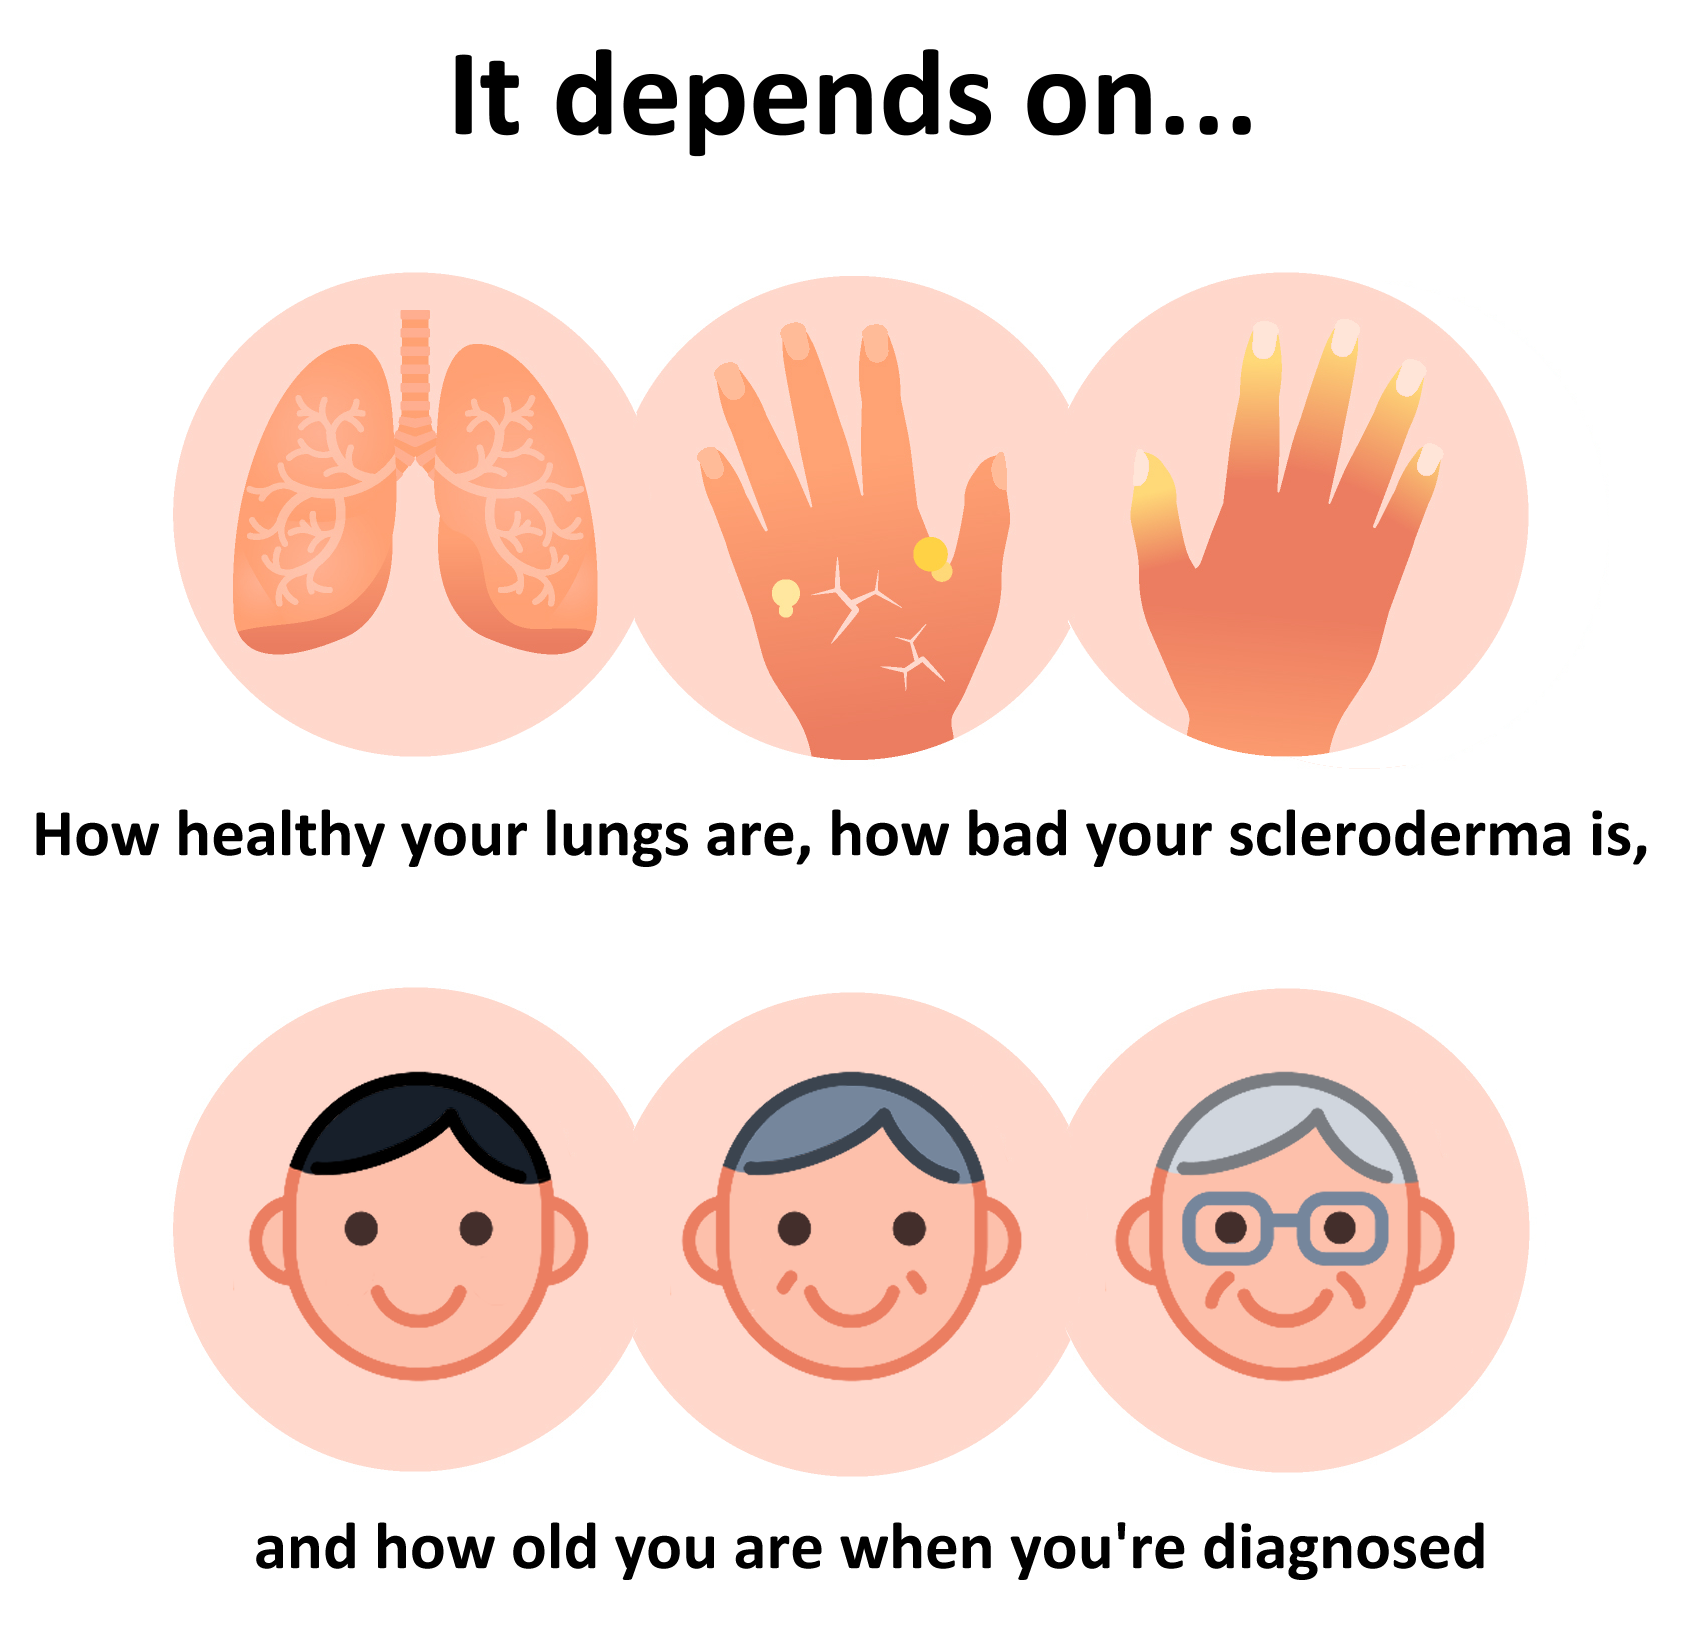 Graphic showing health of lungs, severity of scleroderma and age of person